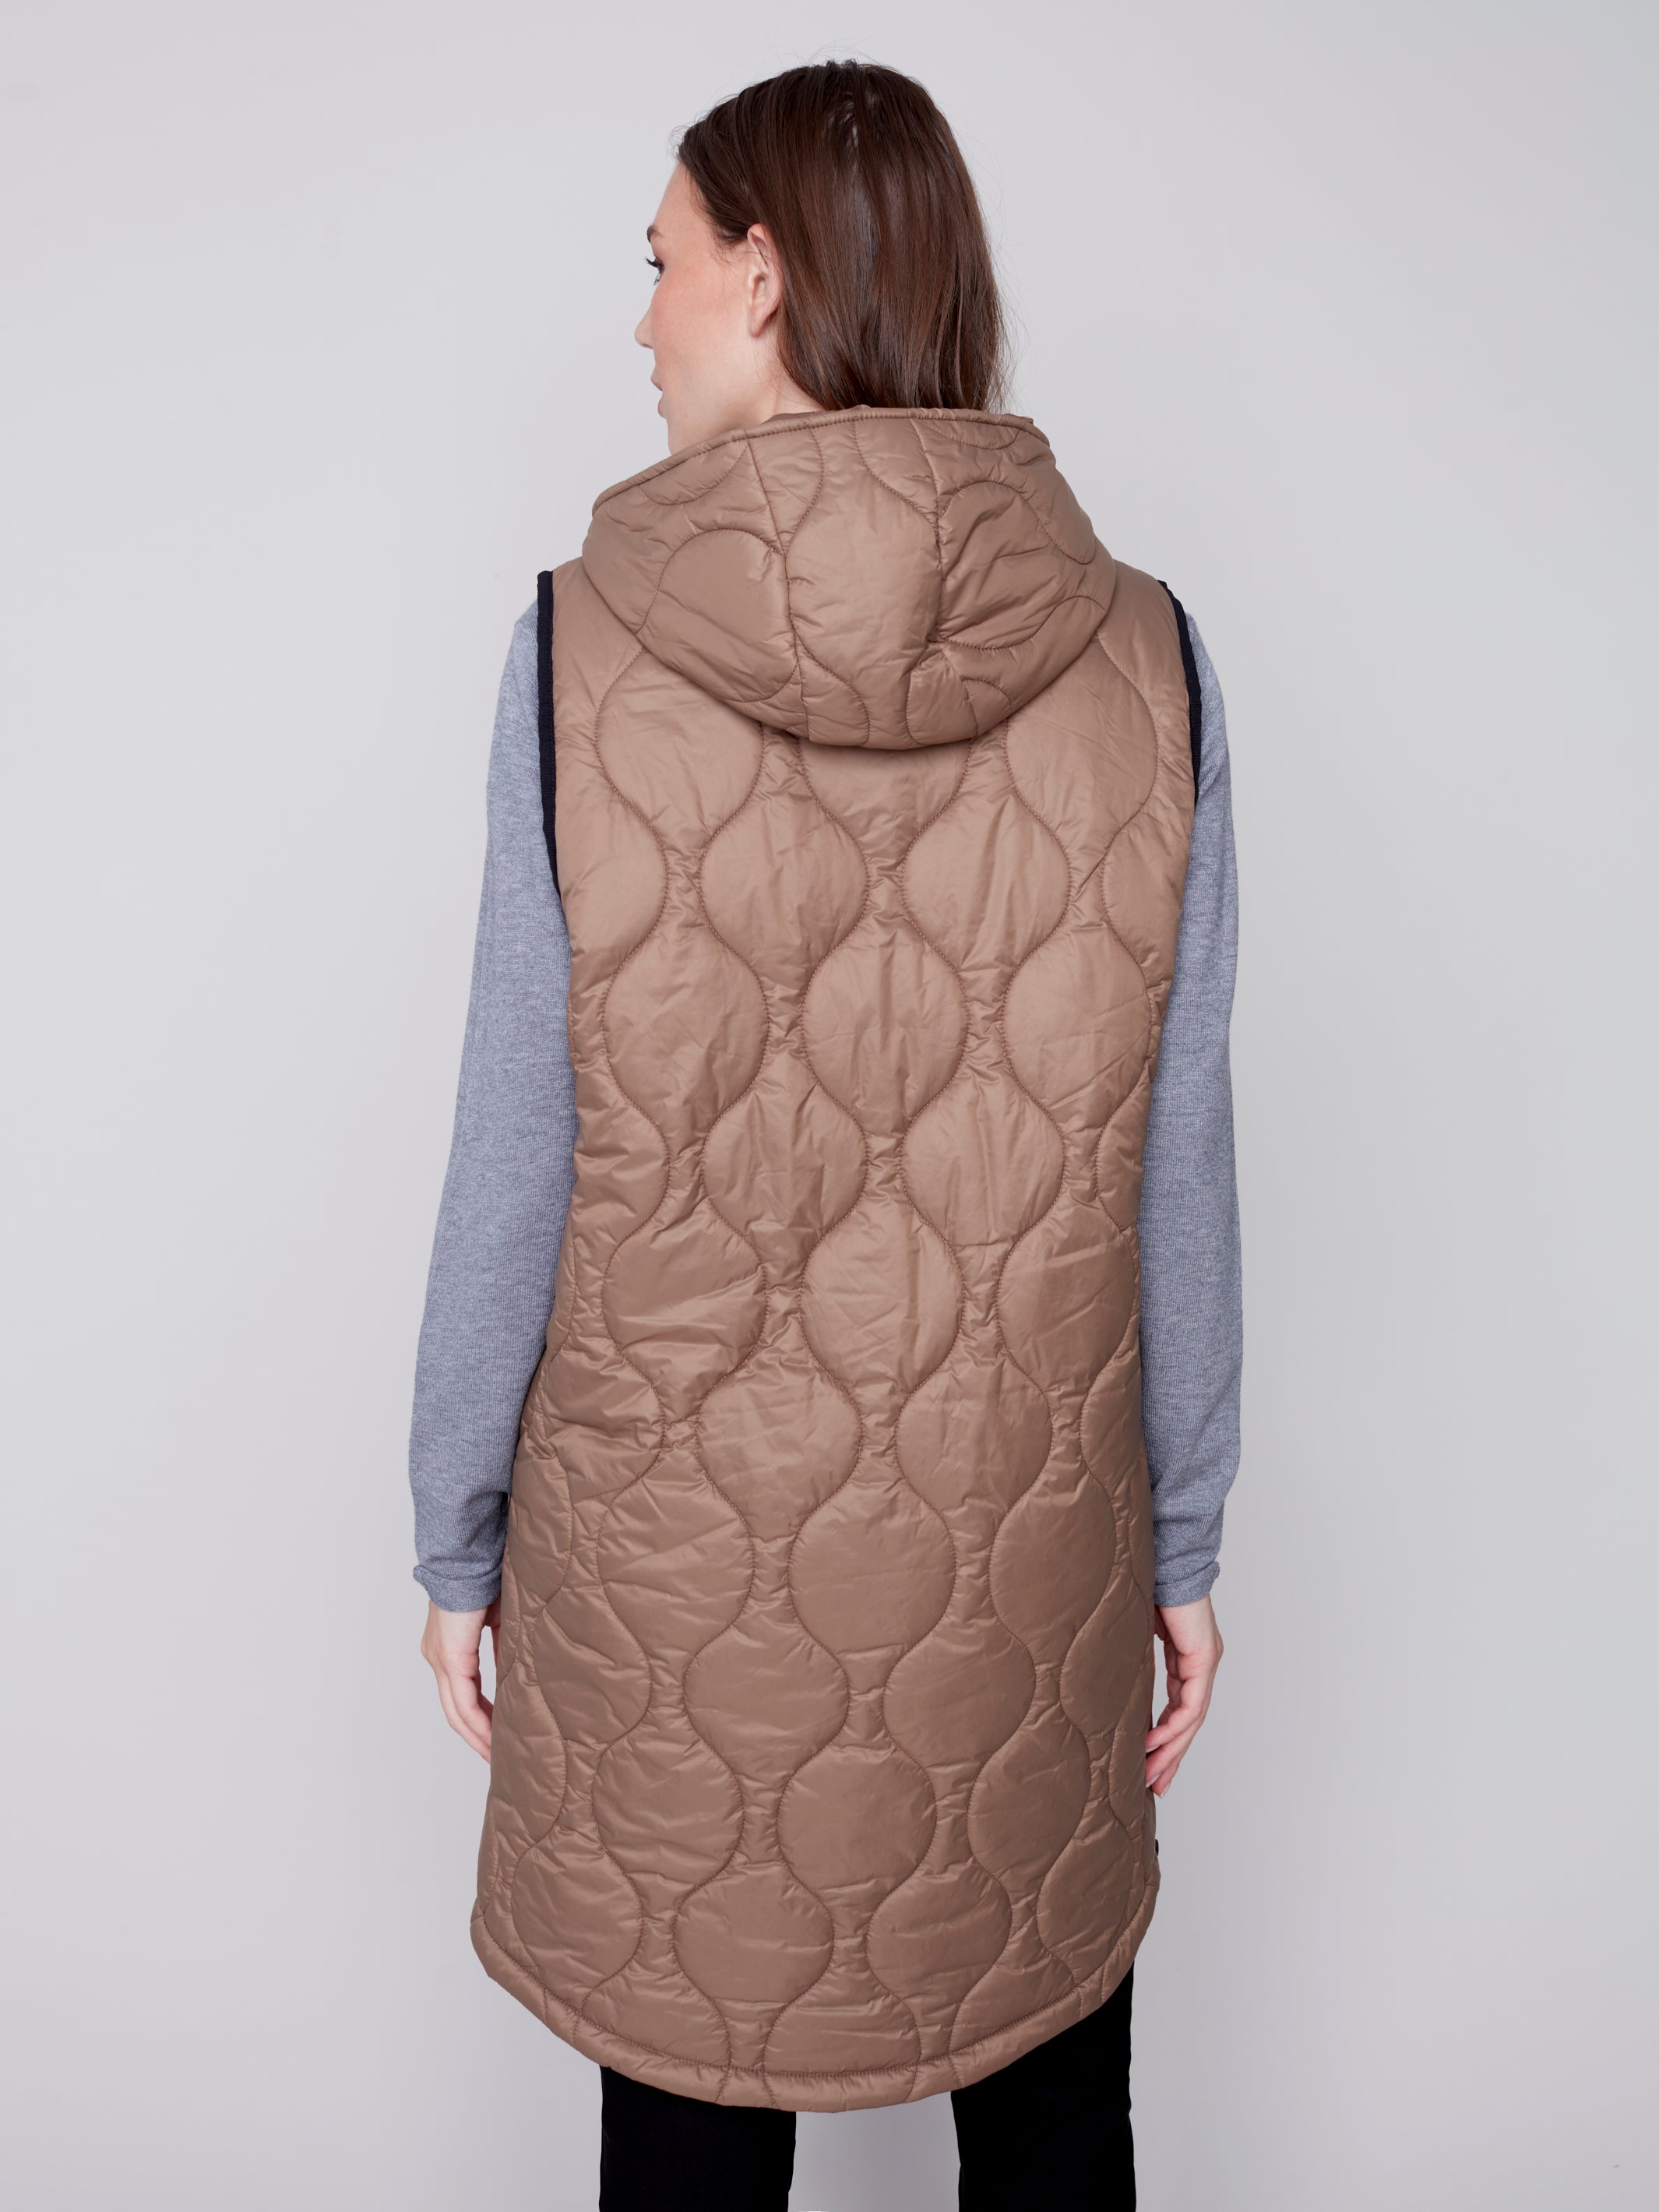 Hooded Long Sleeve Quilted Vest C6268/388B 524